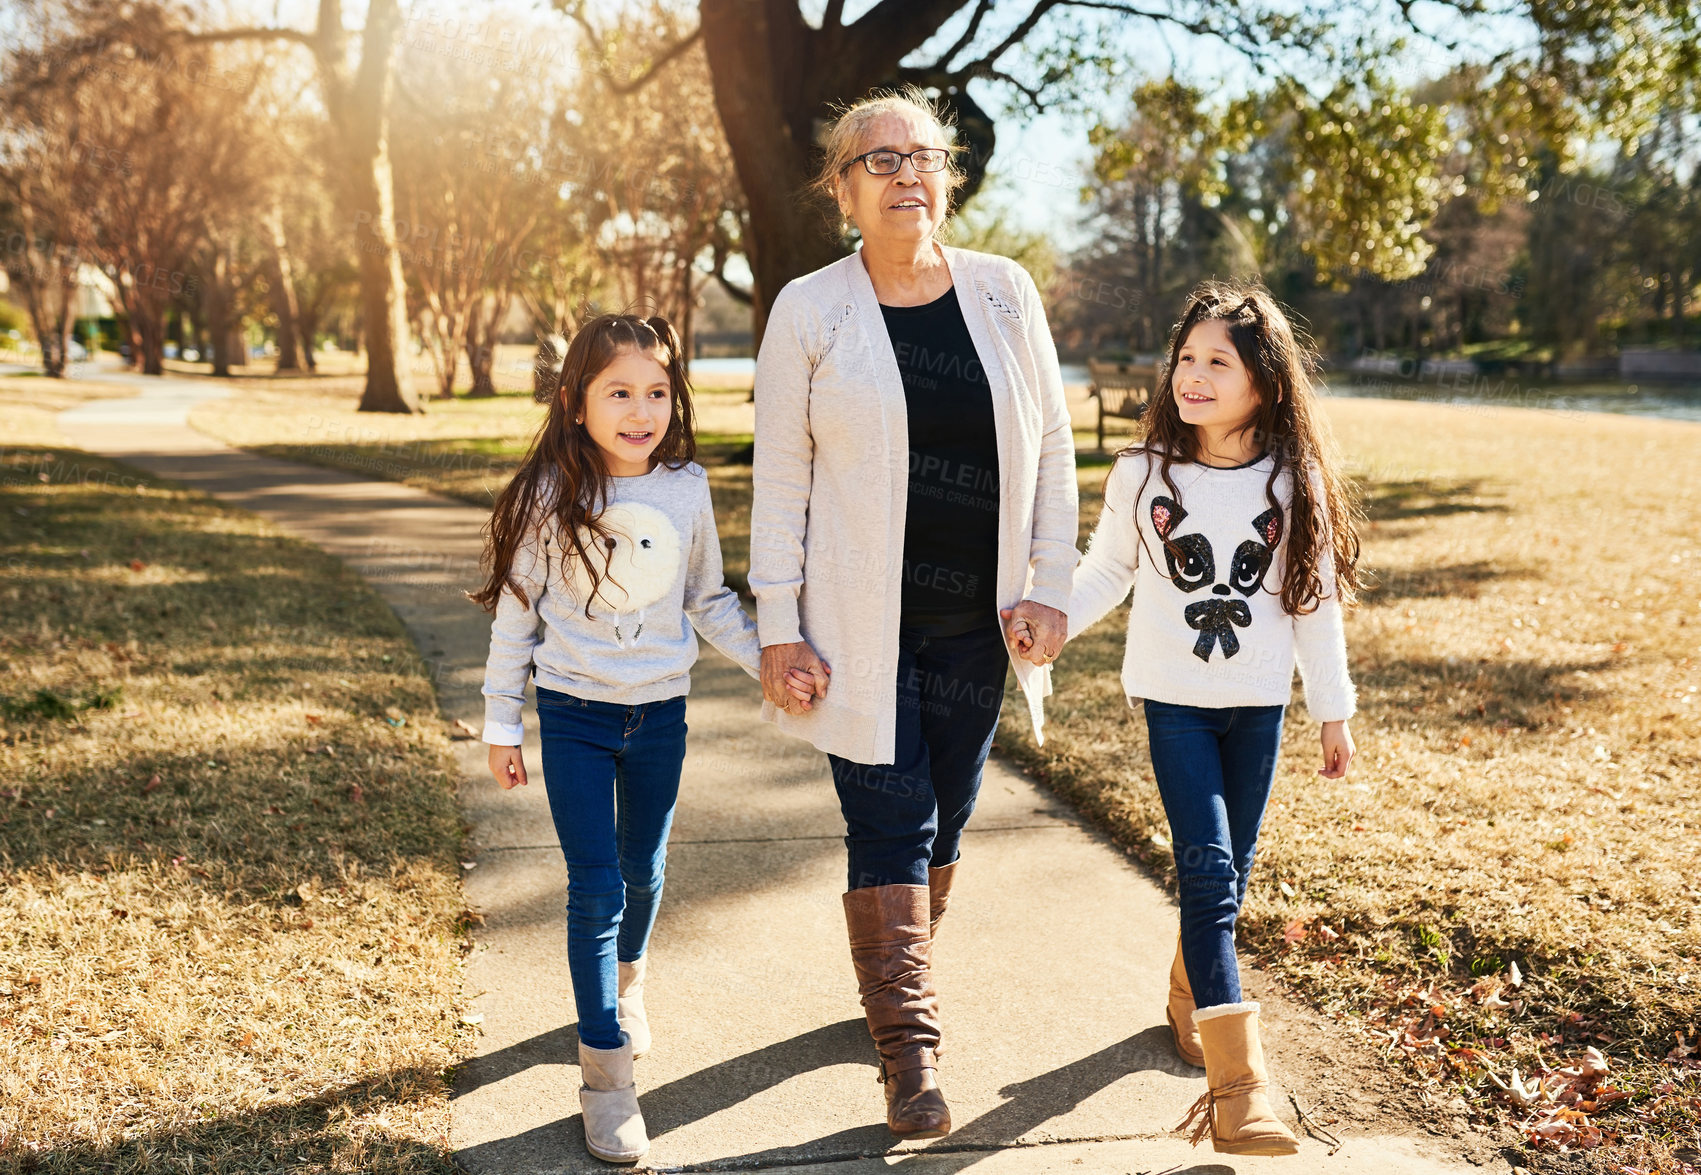 Buy stock photo Shot of a grandmother walking with her adorable granddaughters outdoors